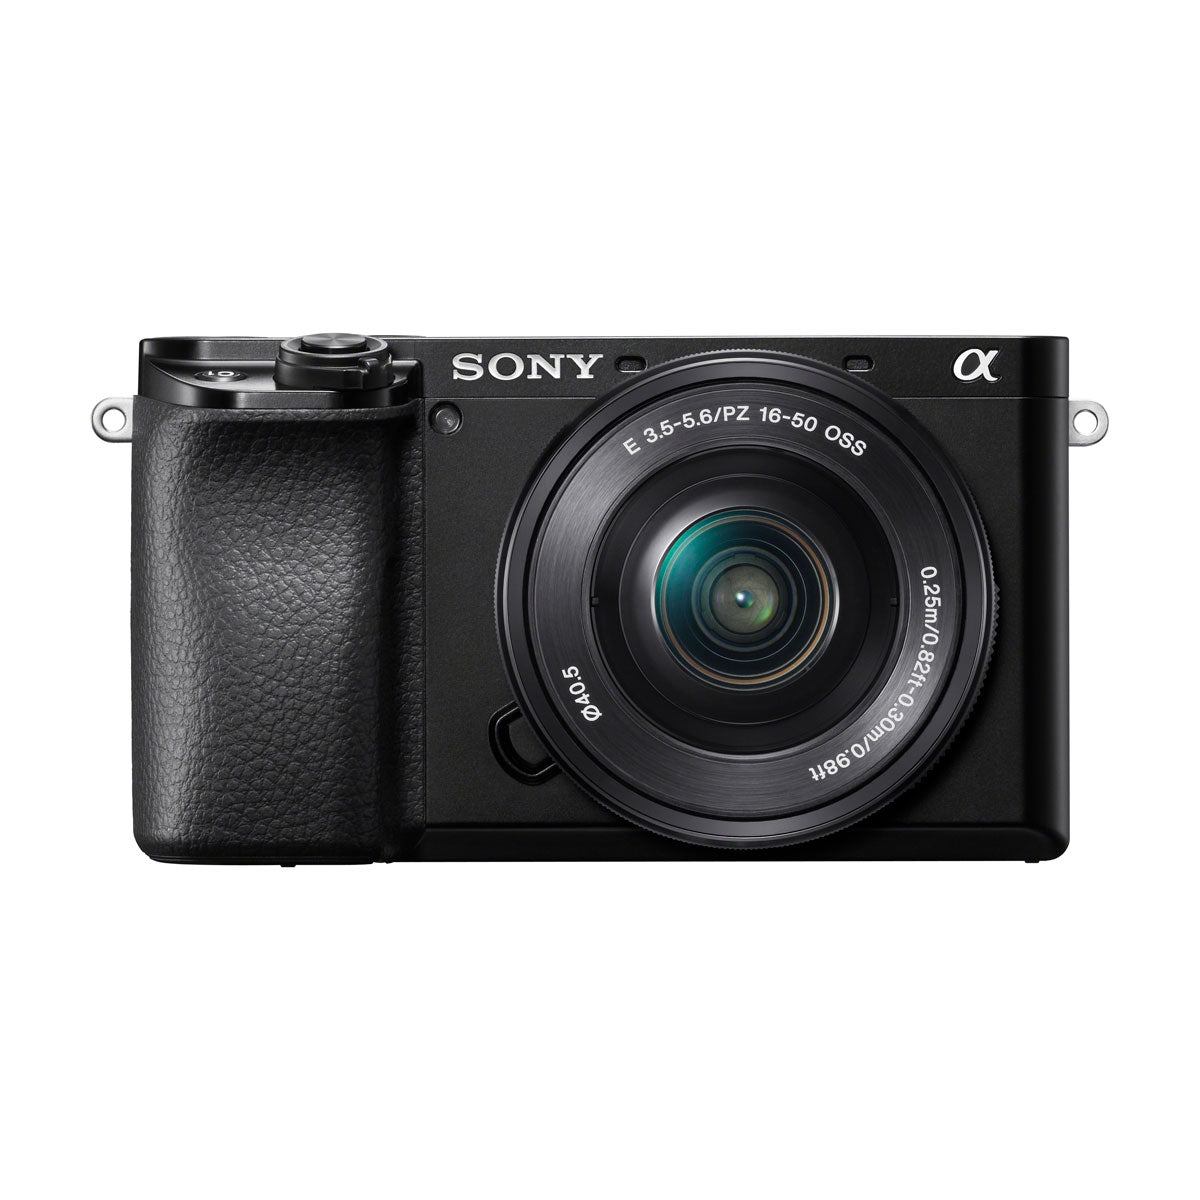 Sony Alpha a6100 Mirrorless Digital Camera with E-Mount 16-50mm Lens